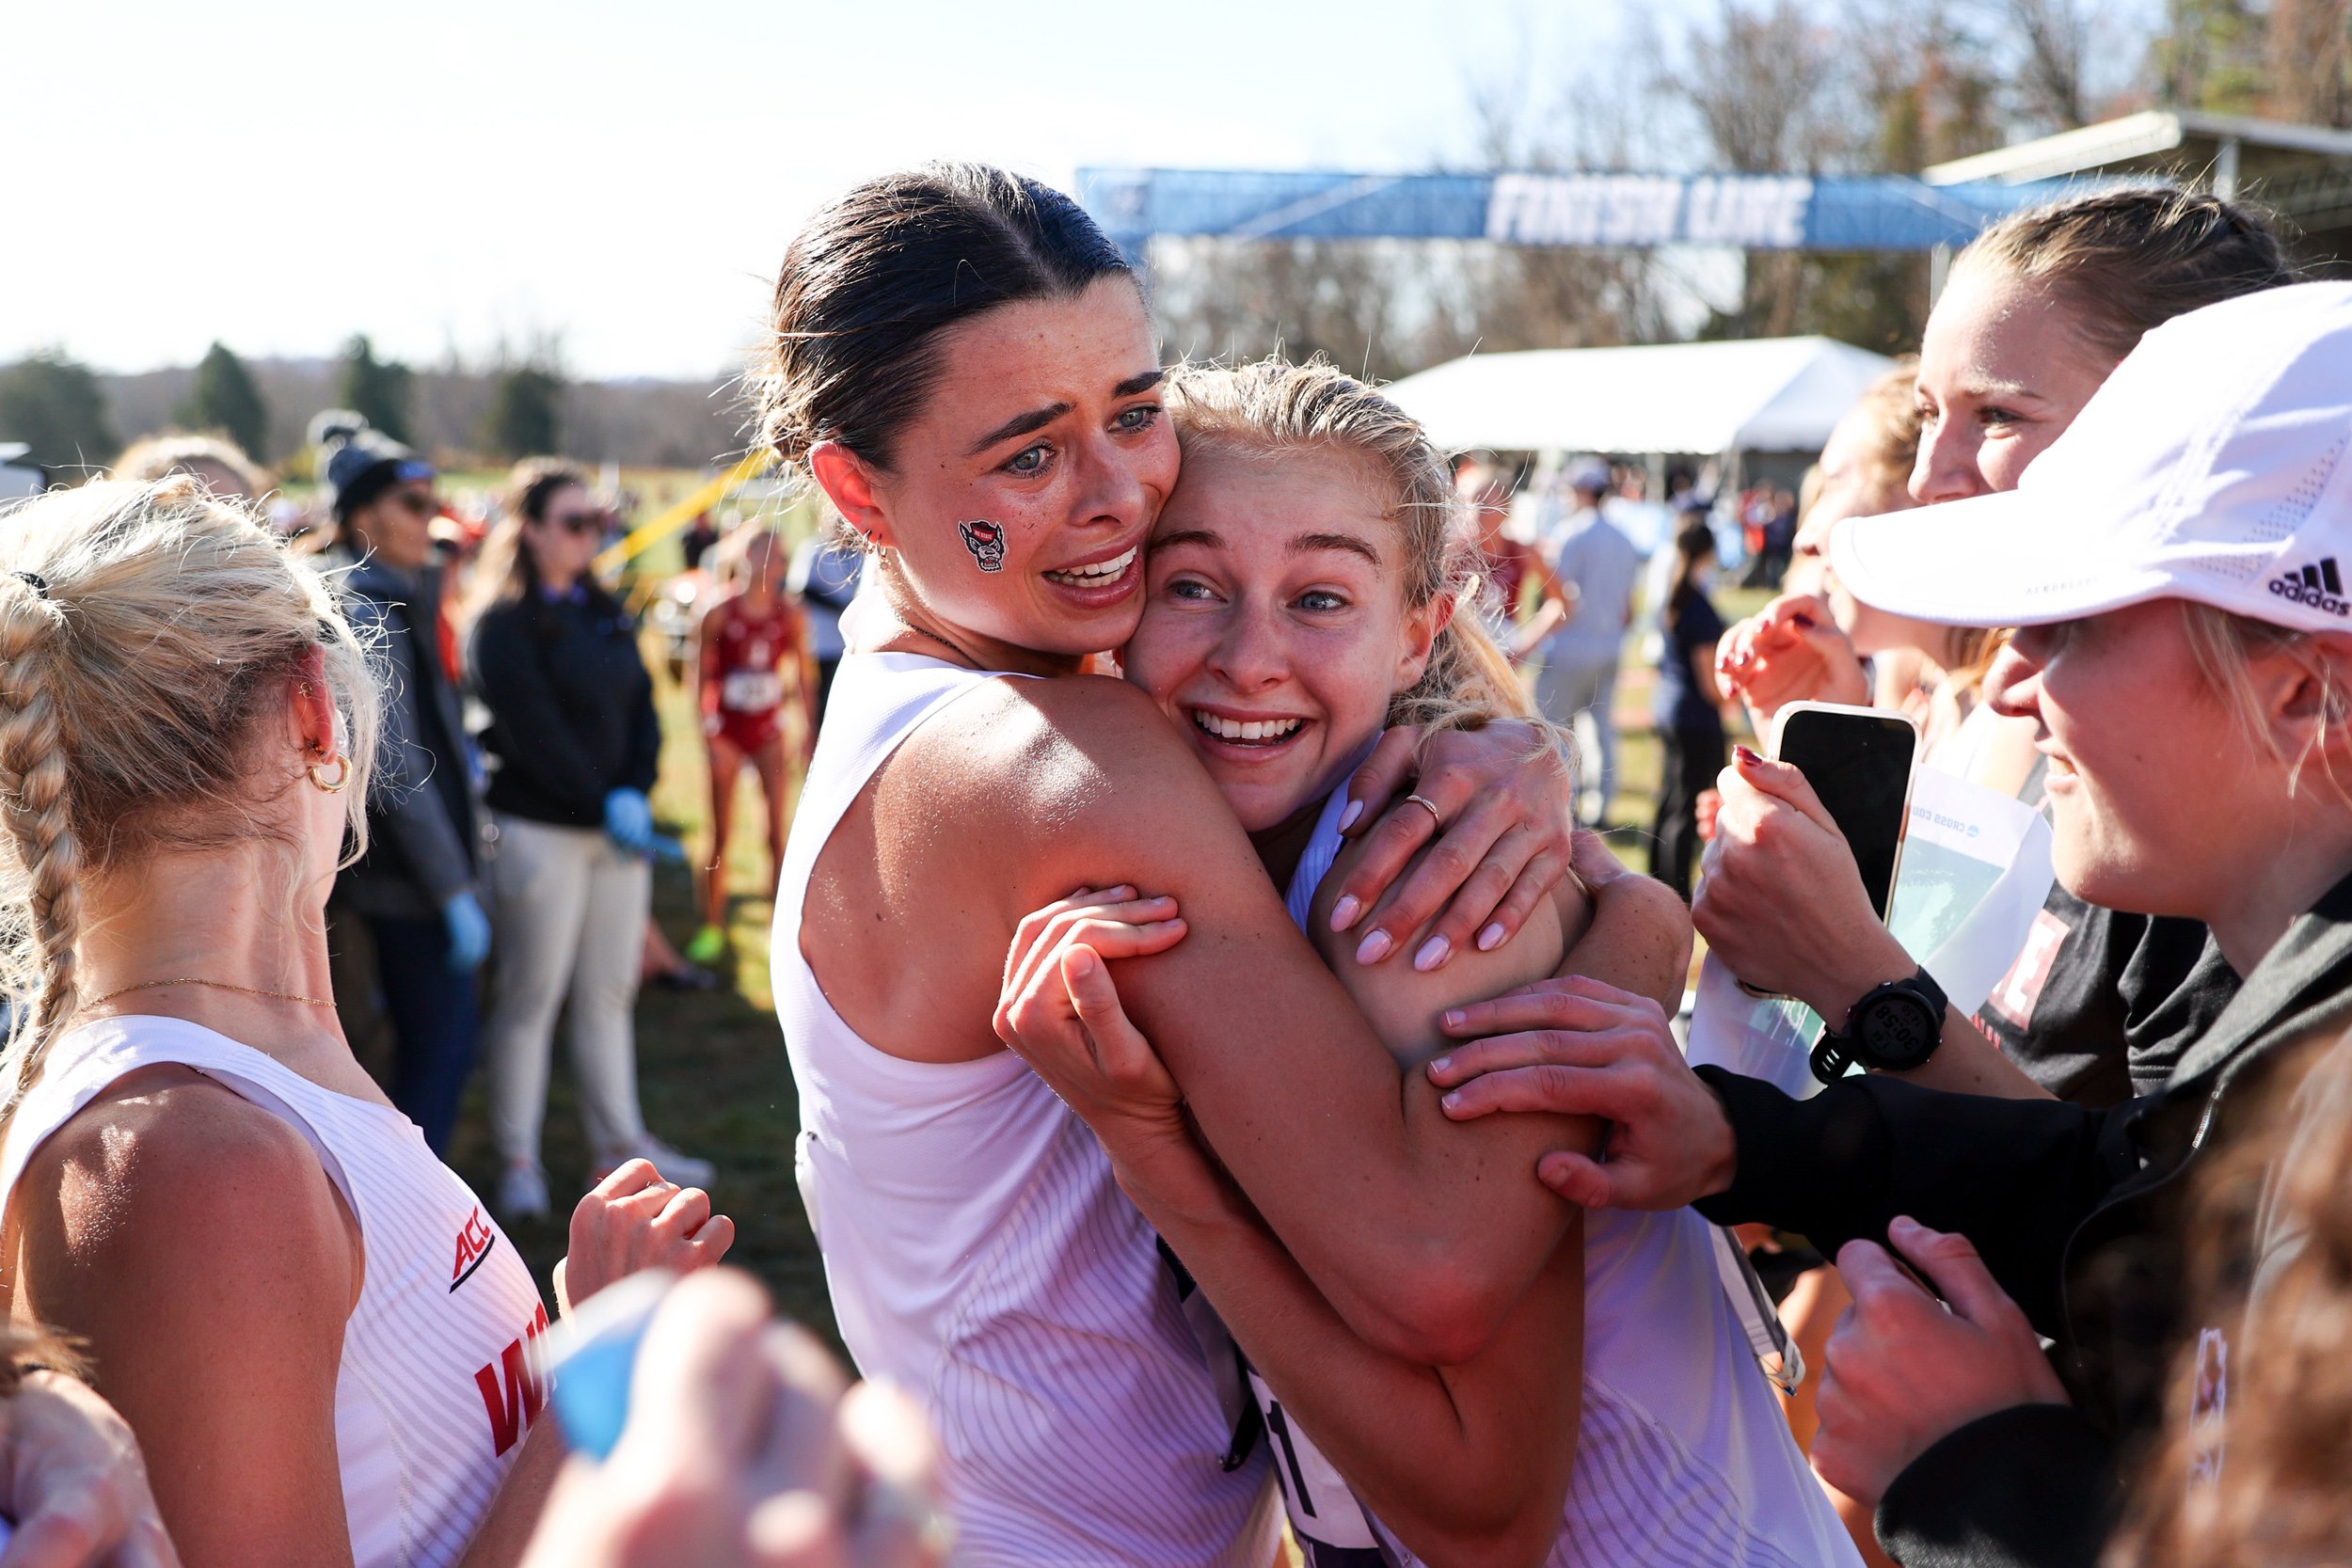  EARLYSVILLE, VIRGINIA - NOVEMBER 18: Hannah Gapes #272 and Katelyn Tuohy #281 of the North Carolina State Wolfpack celebrate after the win during the Division I Men’s and Women’s Cross Country Championship held at Panorama Farms on November 18, 2023